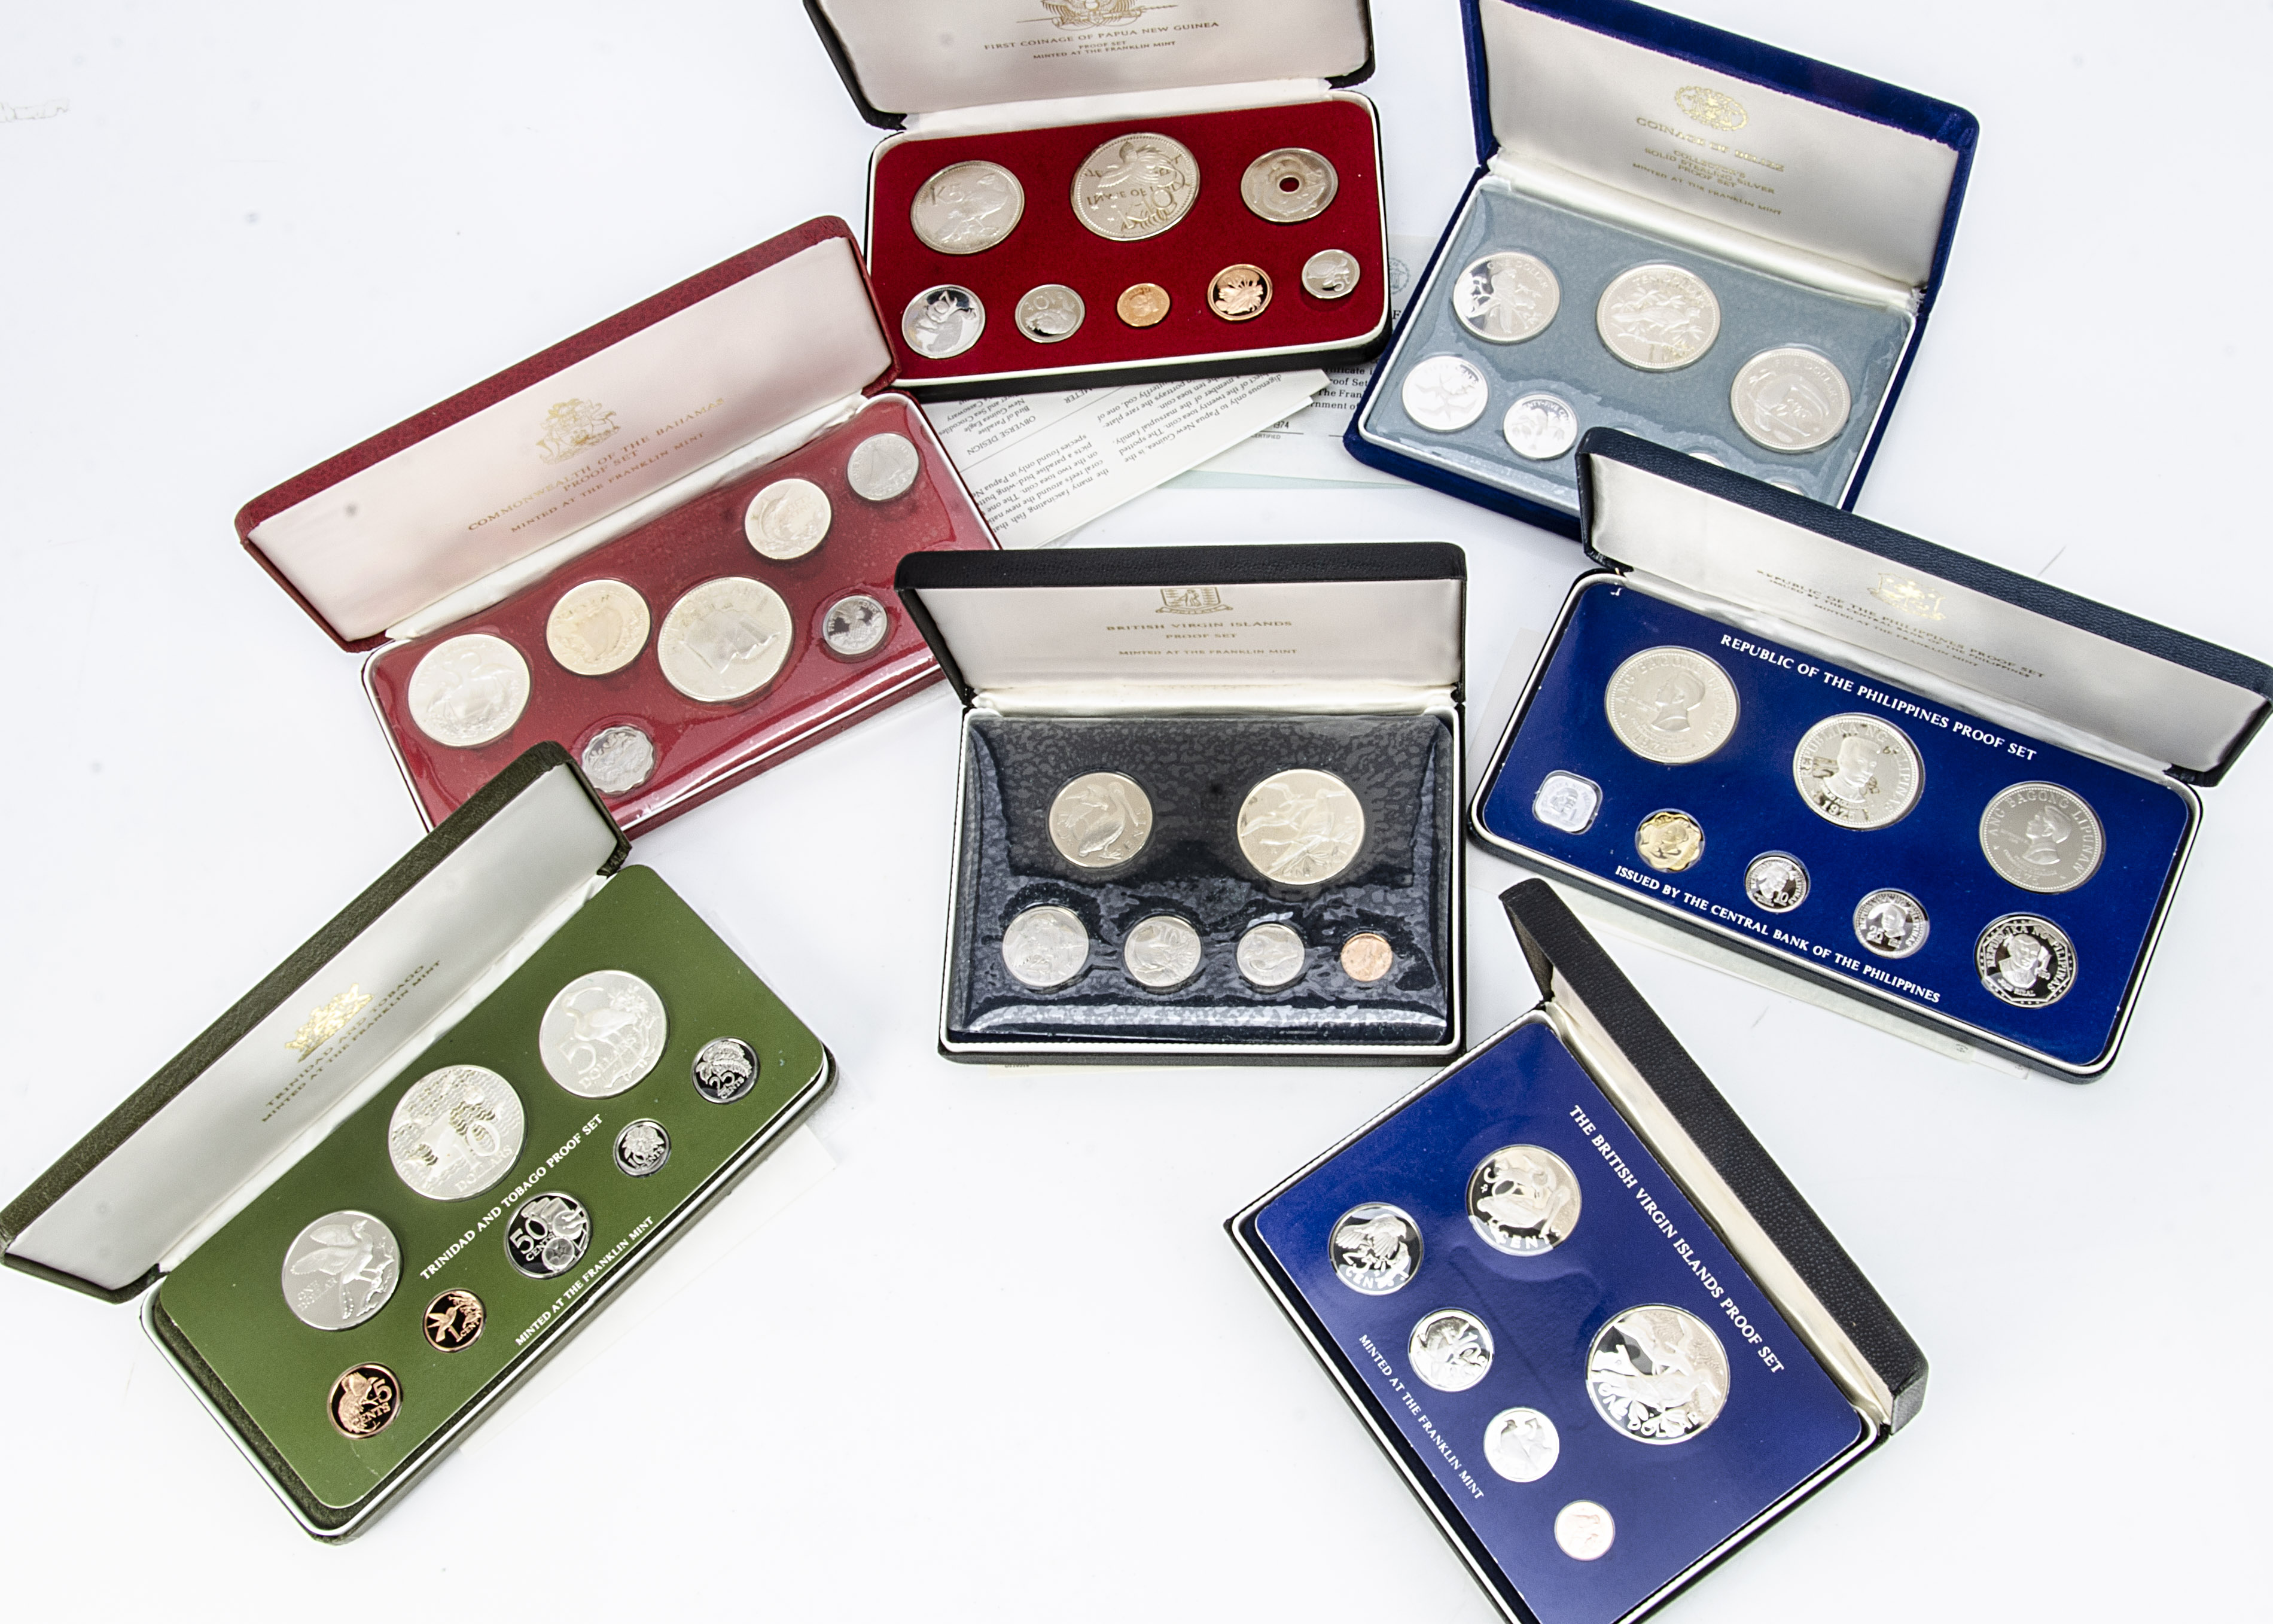 A 1974 Coinage of Belize Silver Proof Eight Coin set, together with six further commonwealth coin